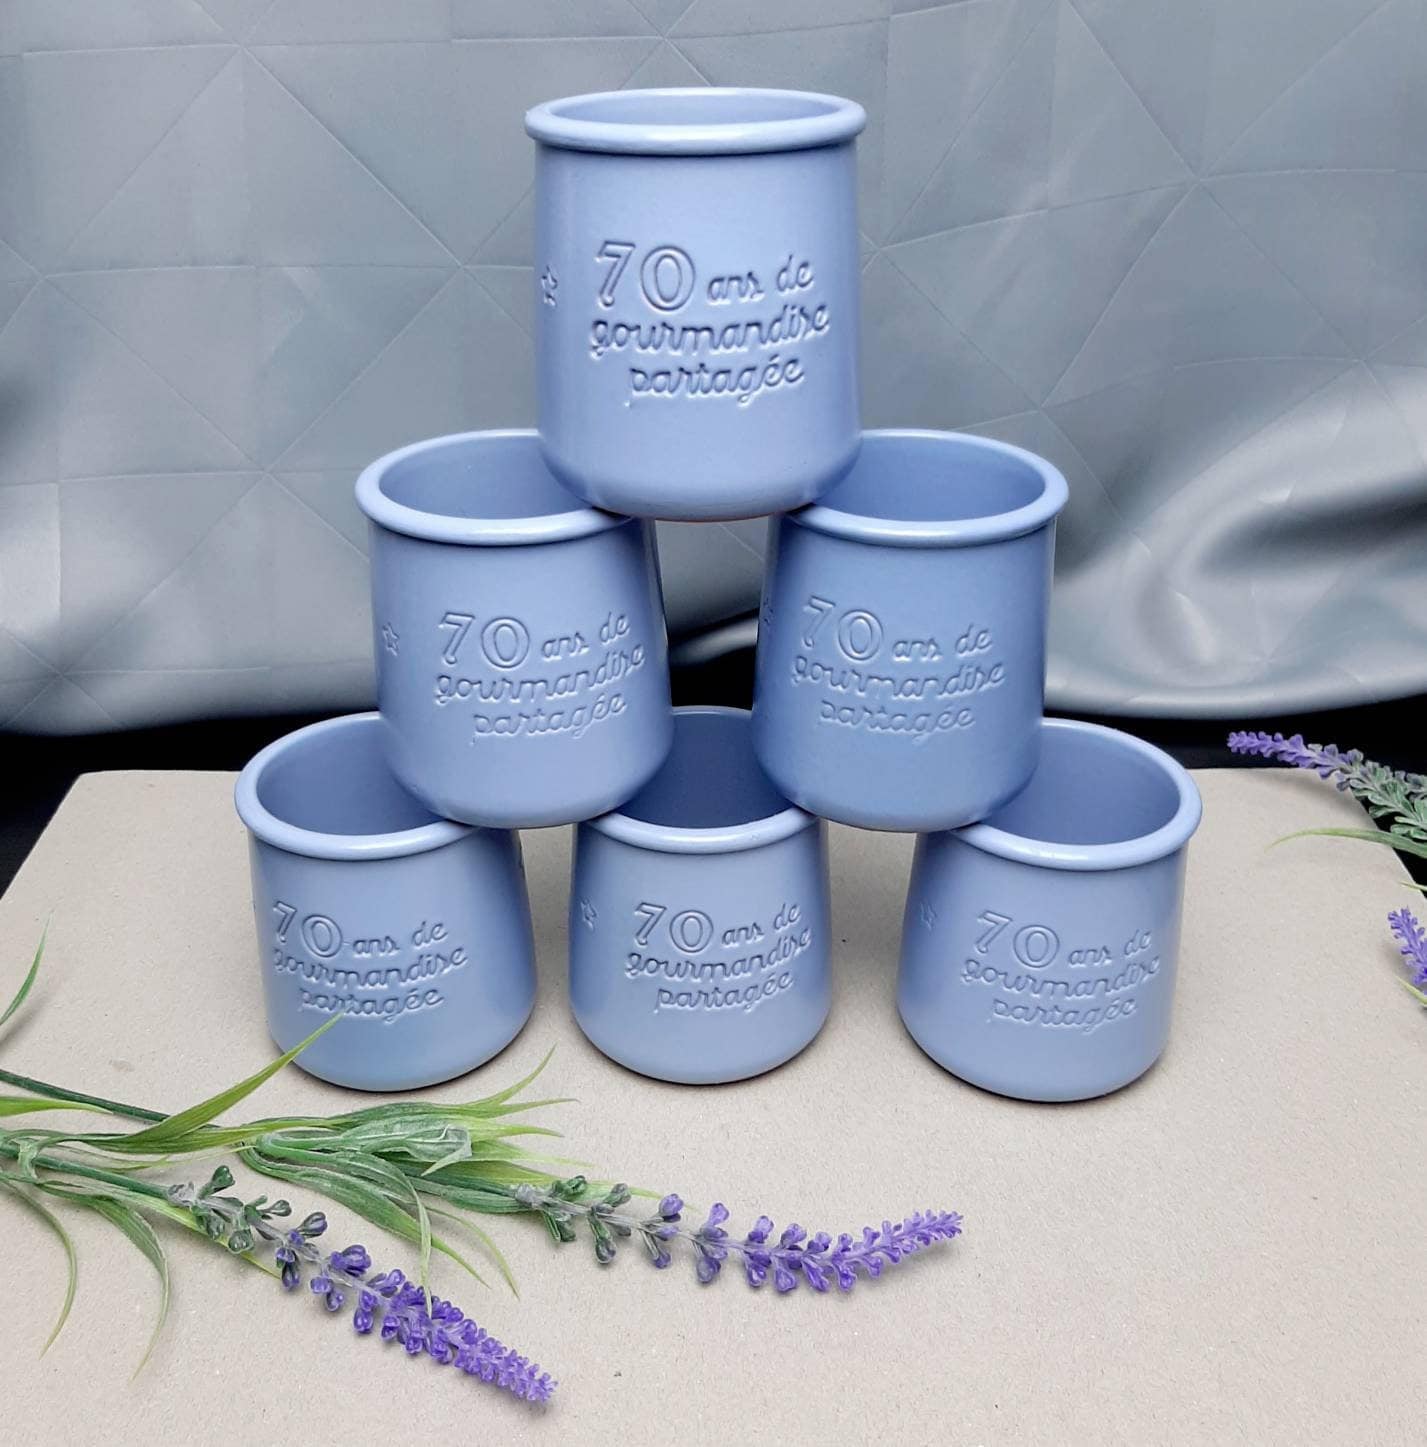 SET OF 6 French La Fermiere Yogurt Pot Containers Limited Edition